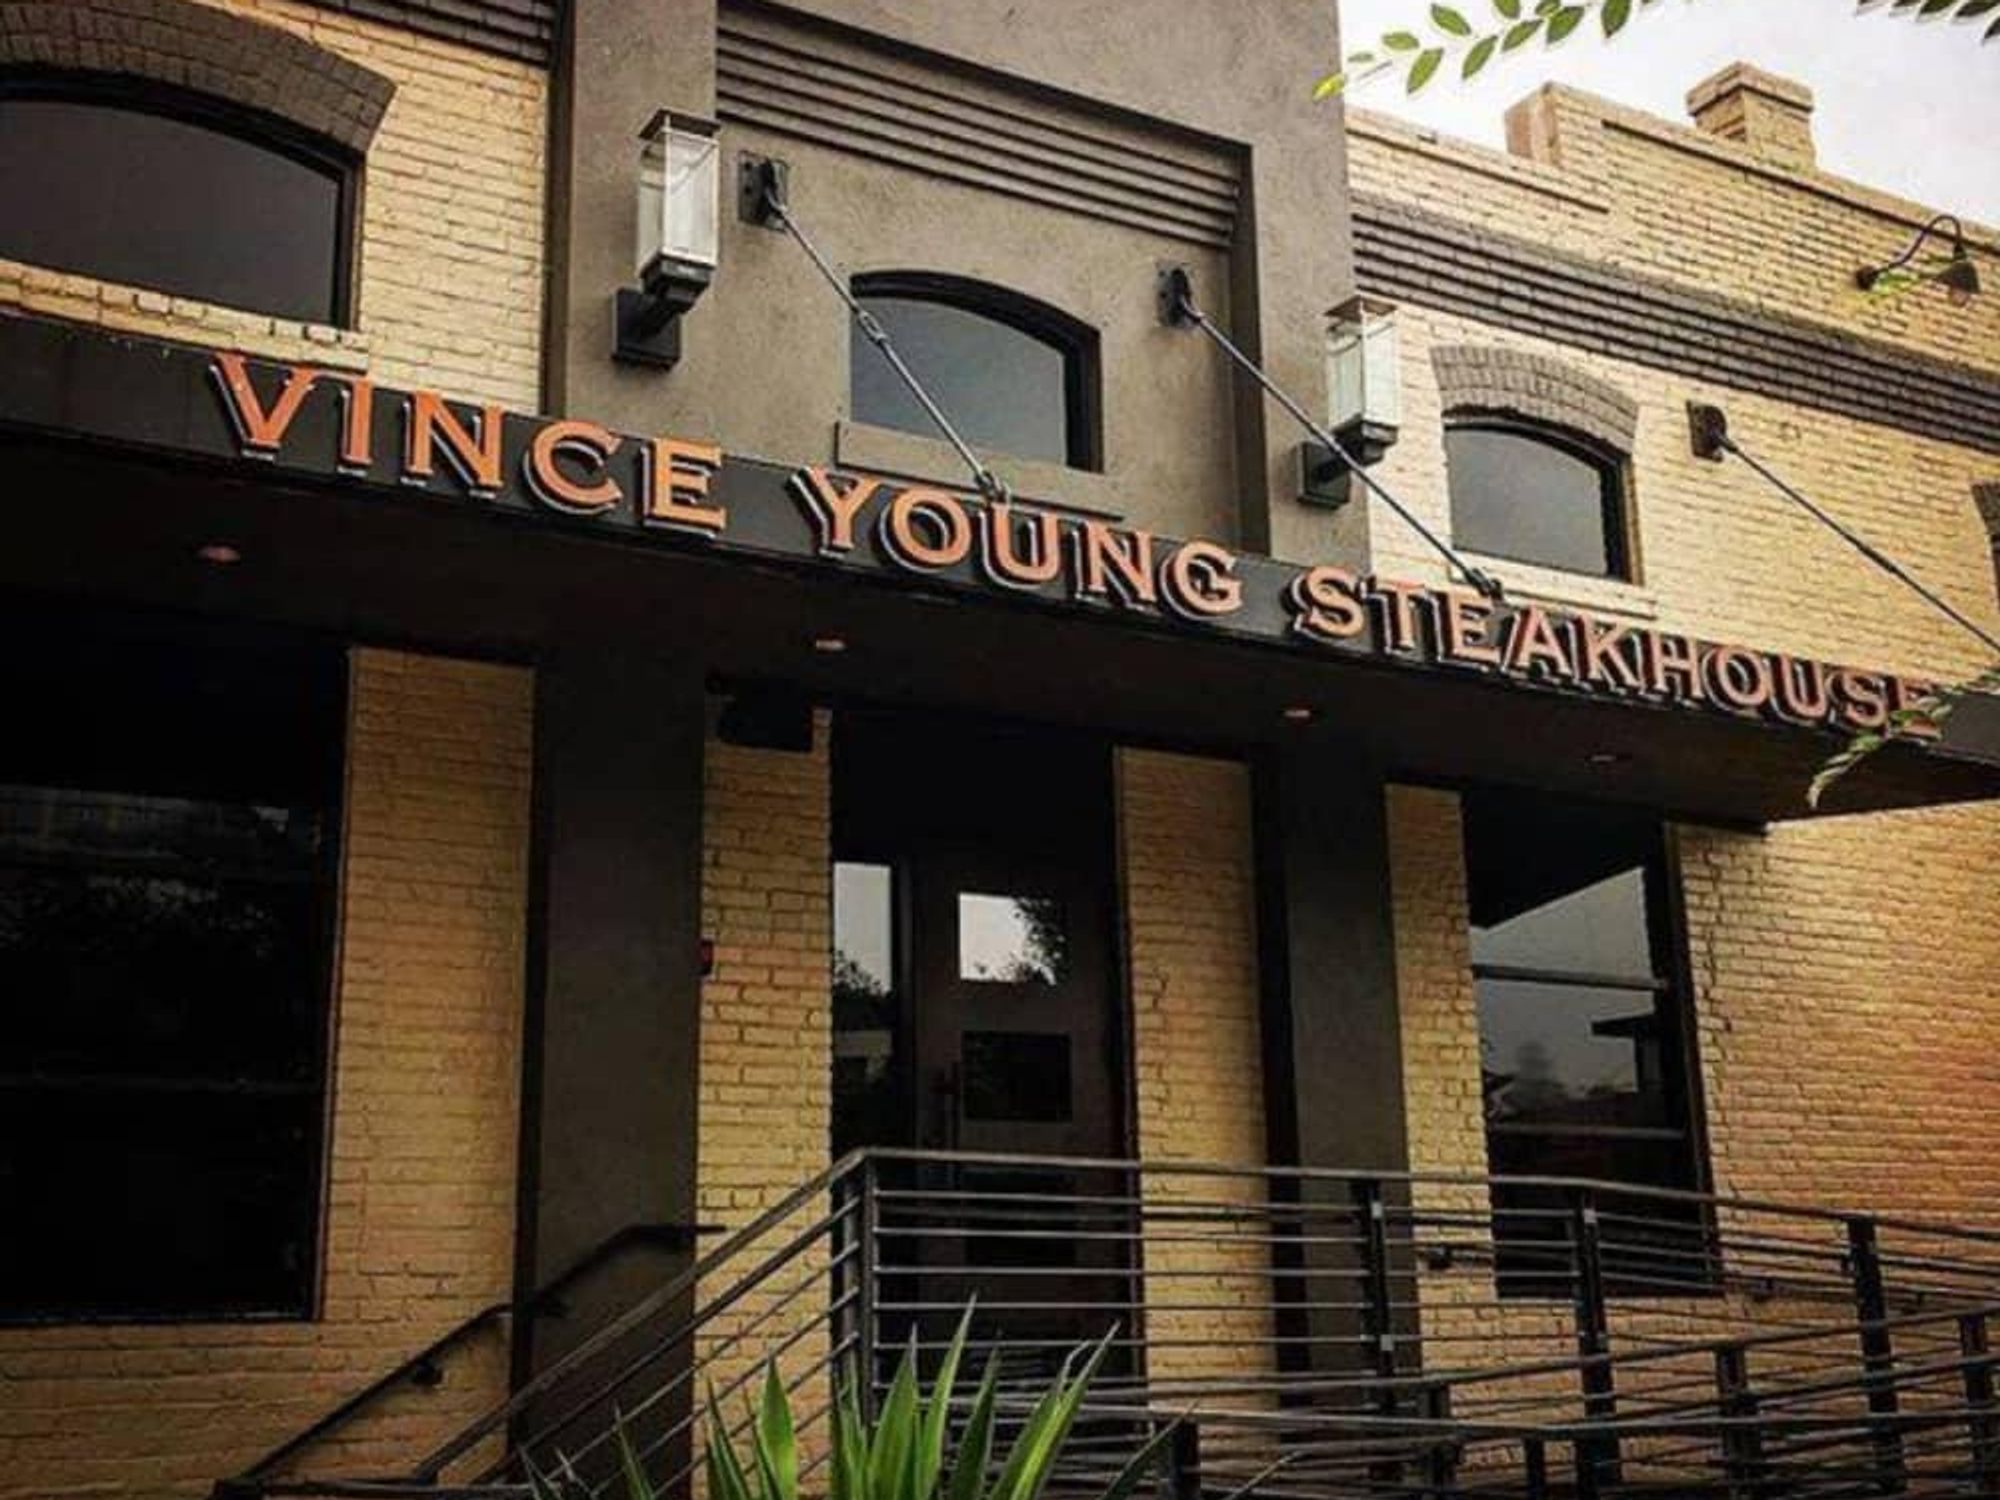 Vince Young Steakhouse